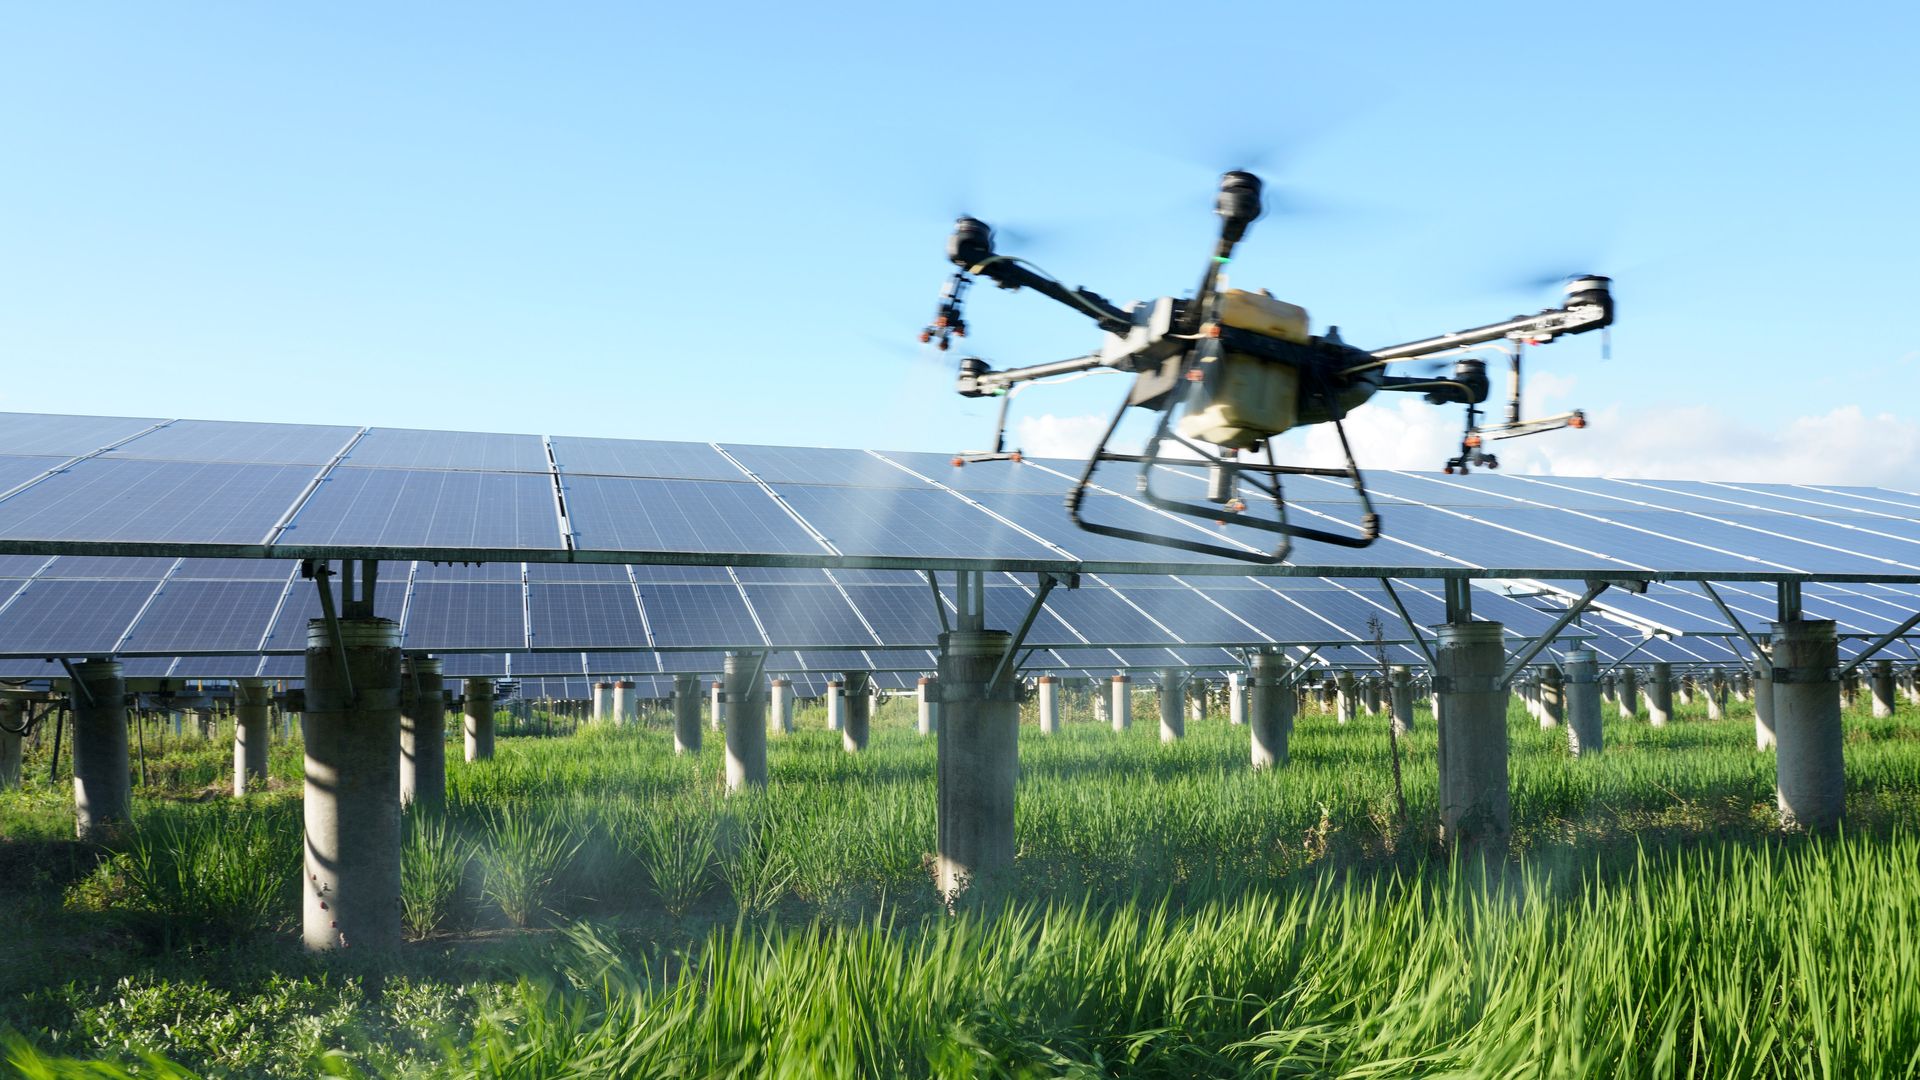 A drone sprays pesticide on seawater rice, or salt-alkali tolerant rice, growing under solar panels at an agrivoltaic farm on August 3, 2022 in Wenzhou, Zhejiang Province of China.